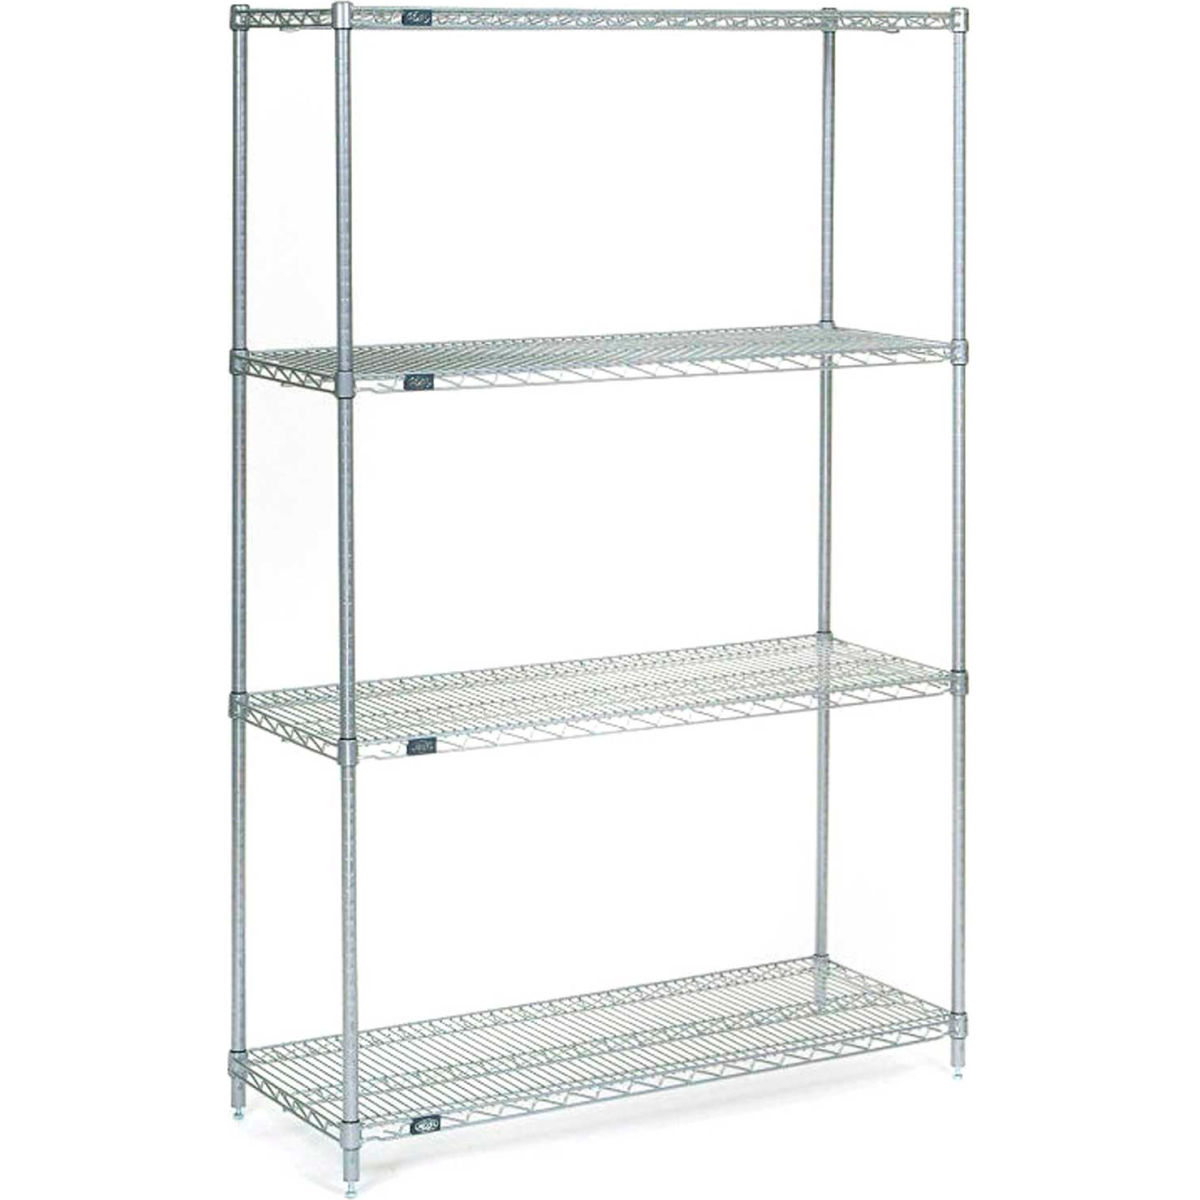 Picture of Global Industrial 14245S 54 x 24 x 14 in. Nexel Stainless Steel Starter Wire Shelving